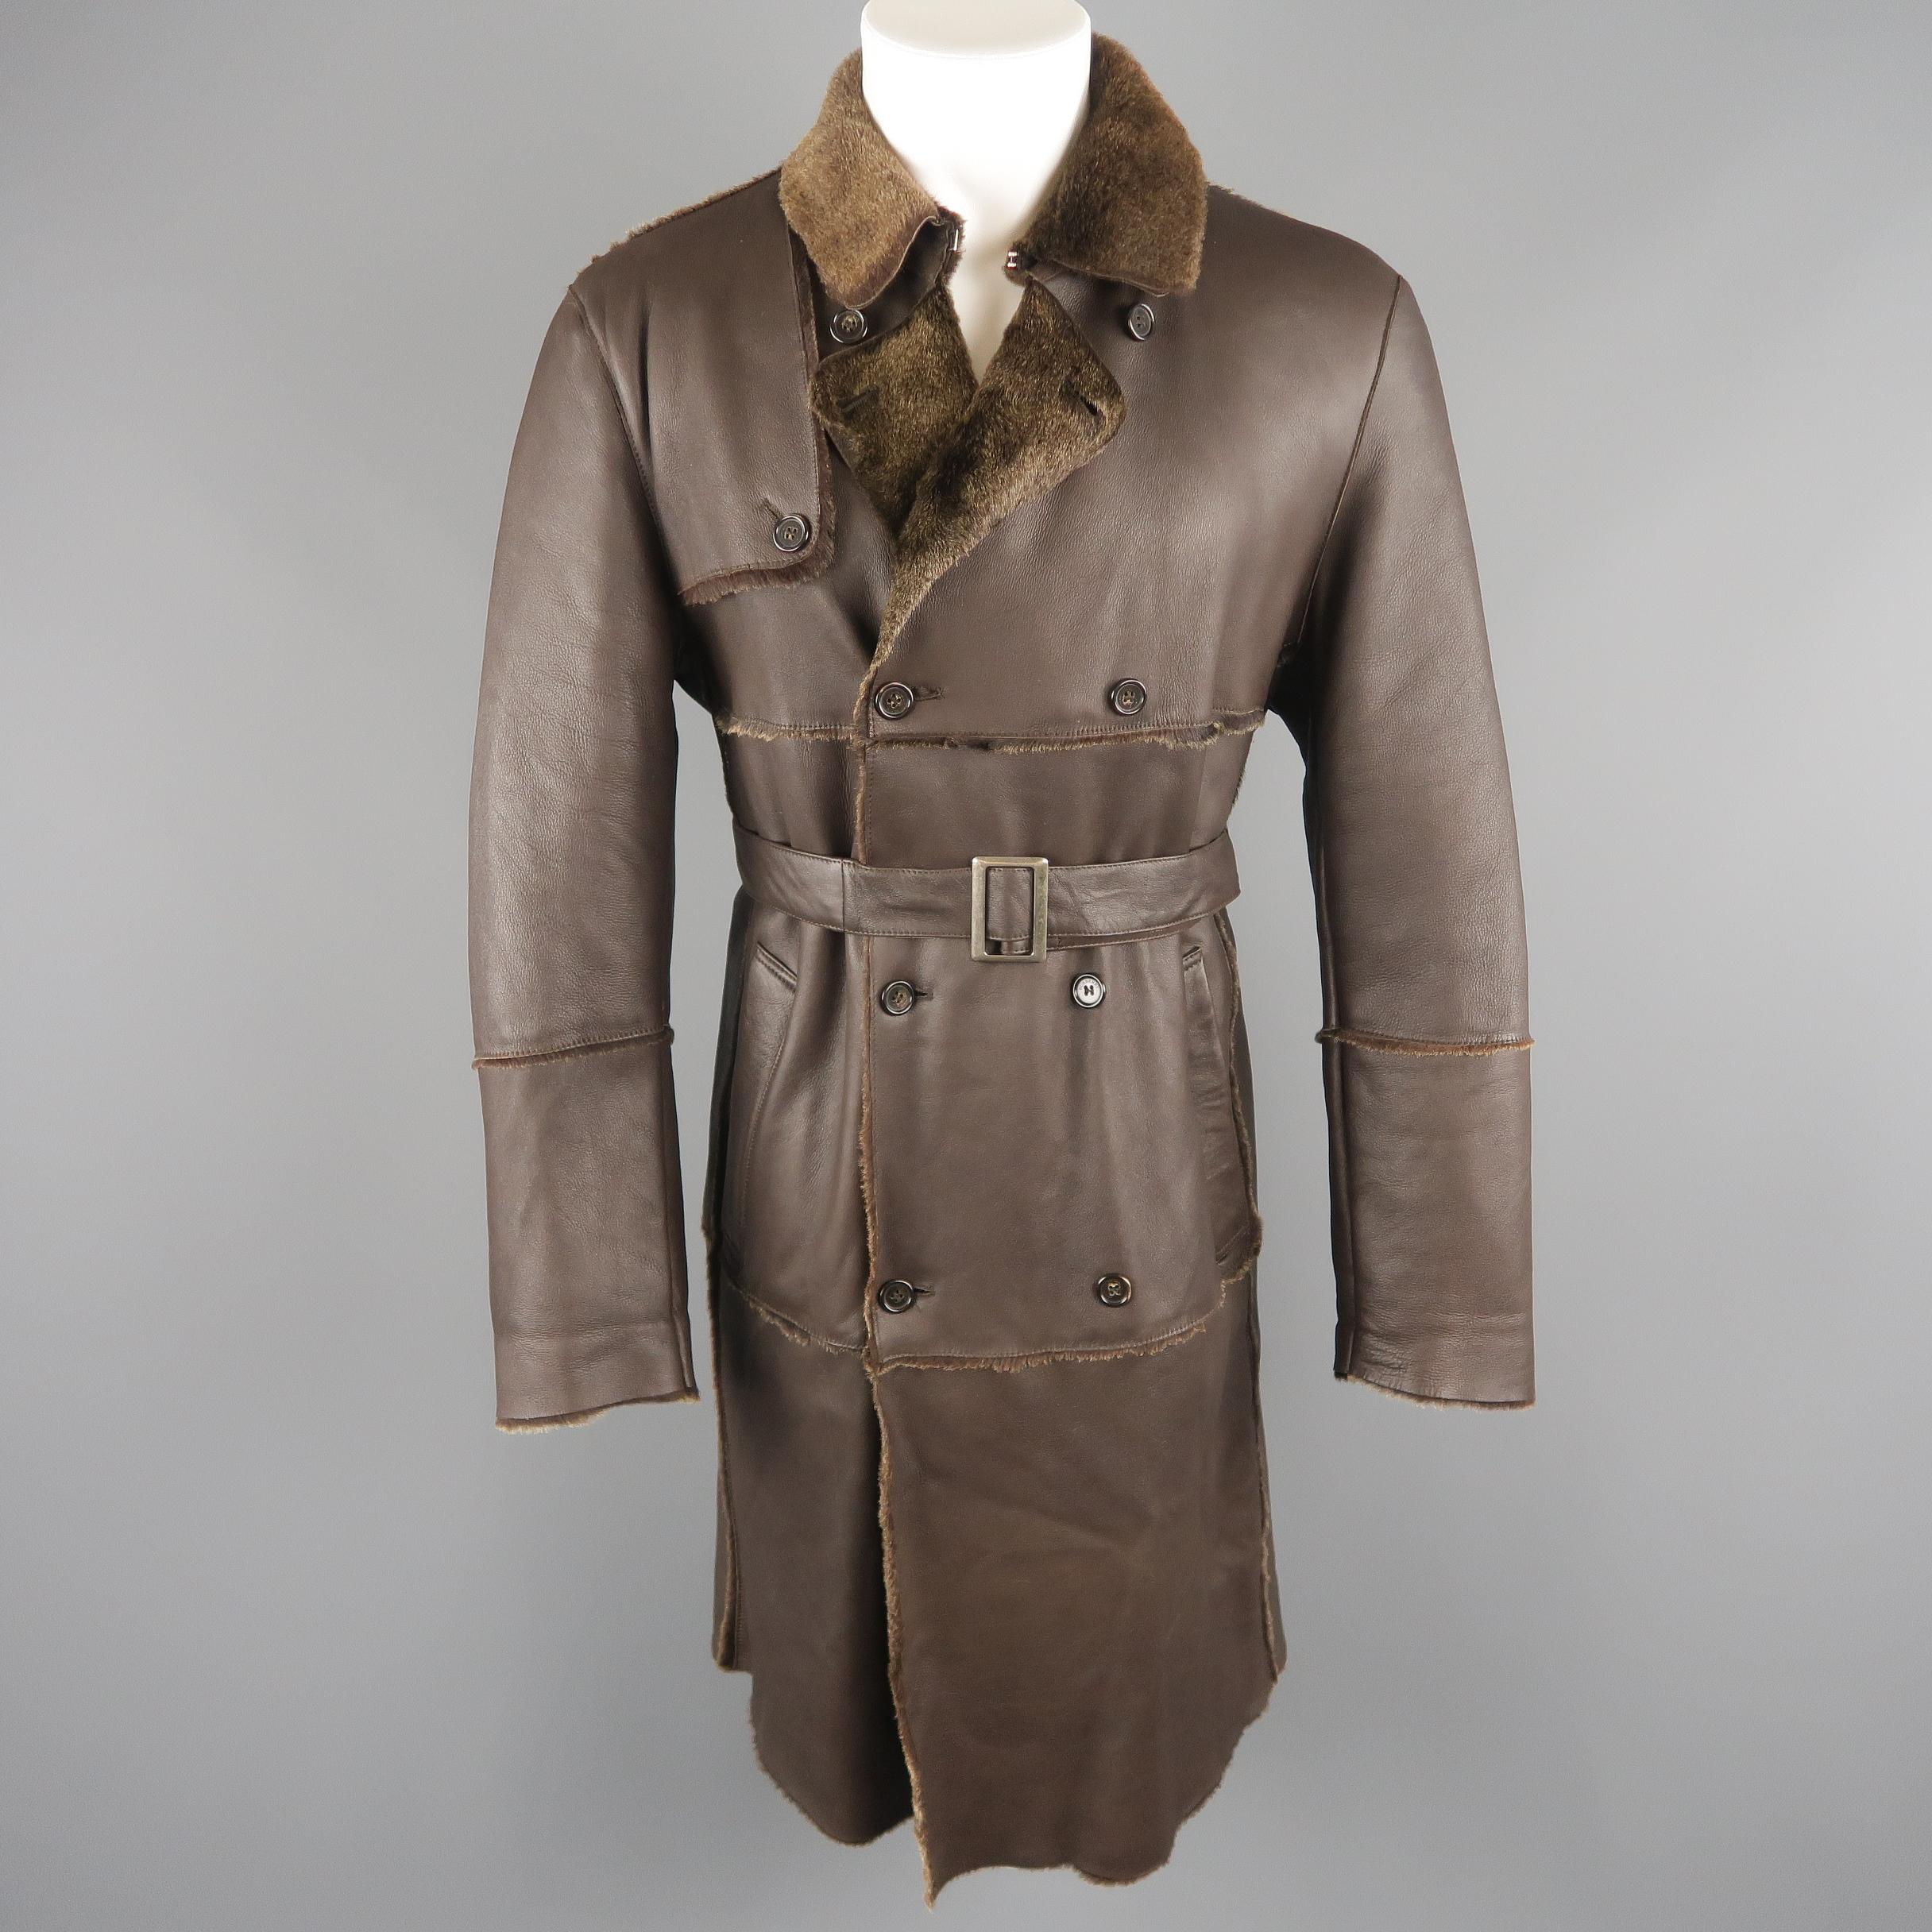 Burberry London trench coat comes in rich brown lamb skin shearling with trimmed fur interior and features a pointed hood eye closure collar, storm flap, double breasted button front, slanted pockets, and belted waist. Made in Italy.
 
Excellent